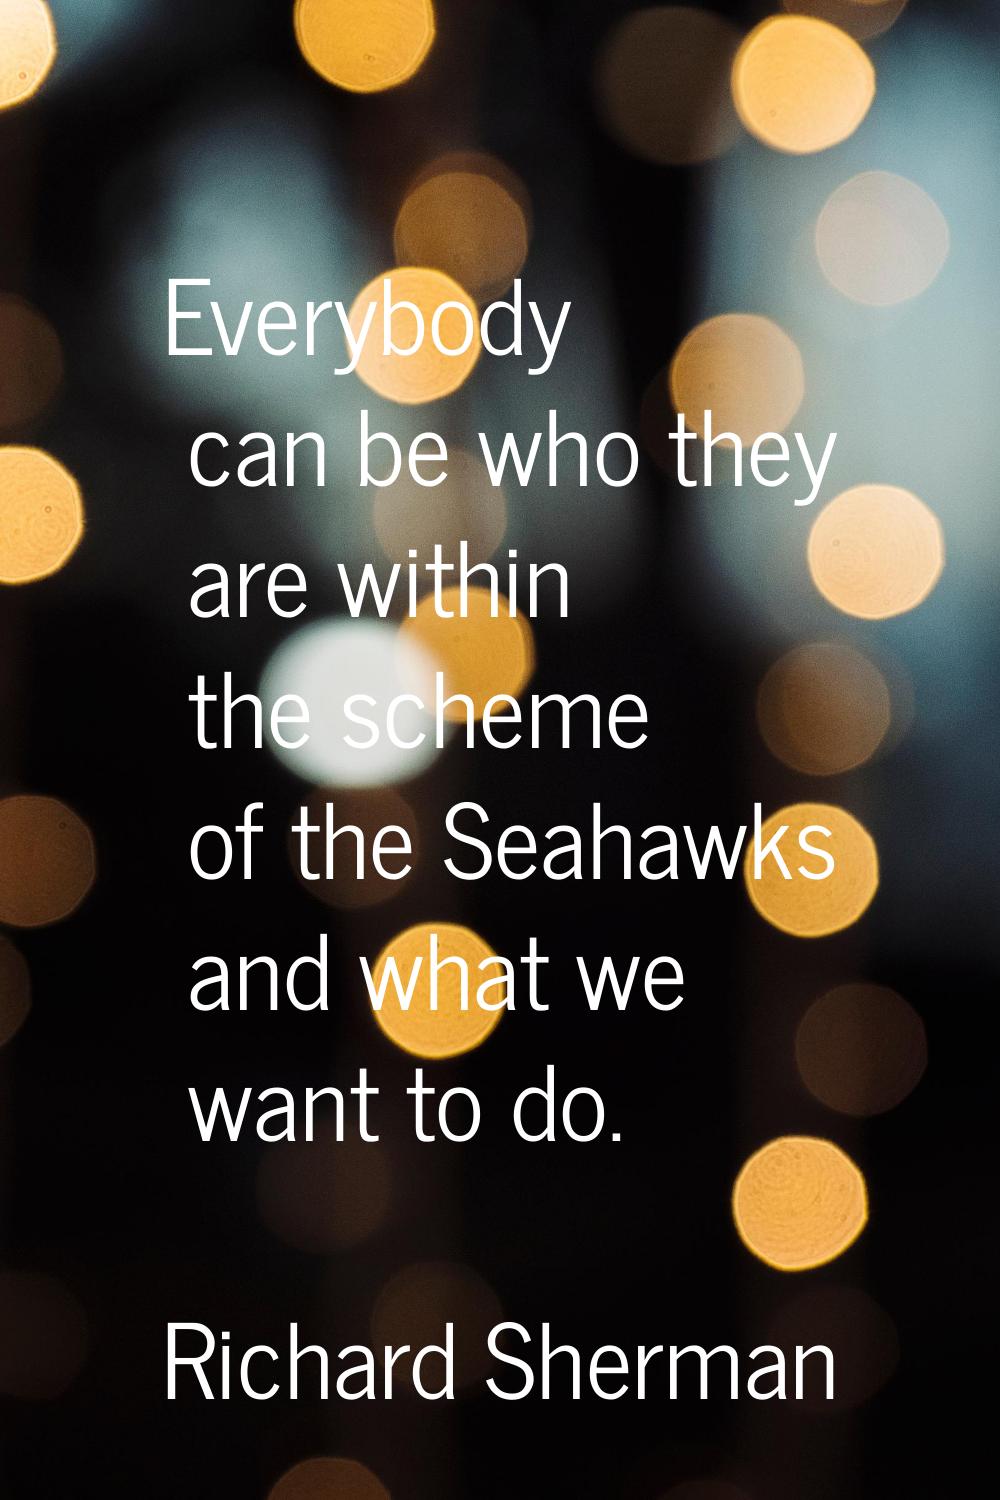 Everybody can be who they are within the scheme of the Seahawks and what we want to do.